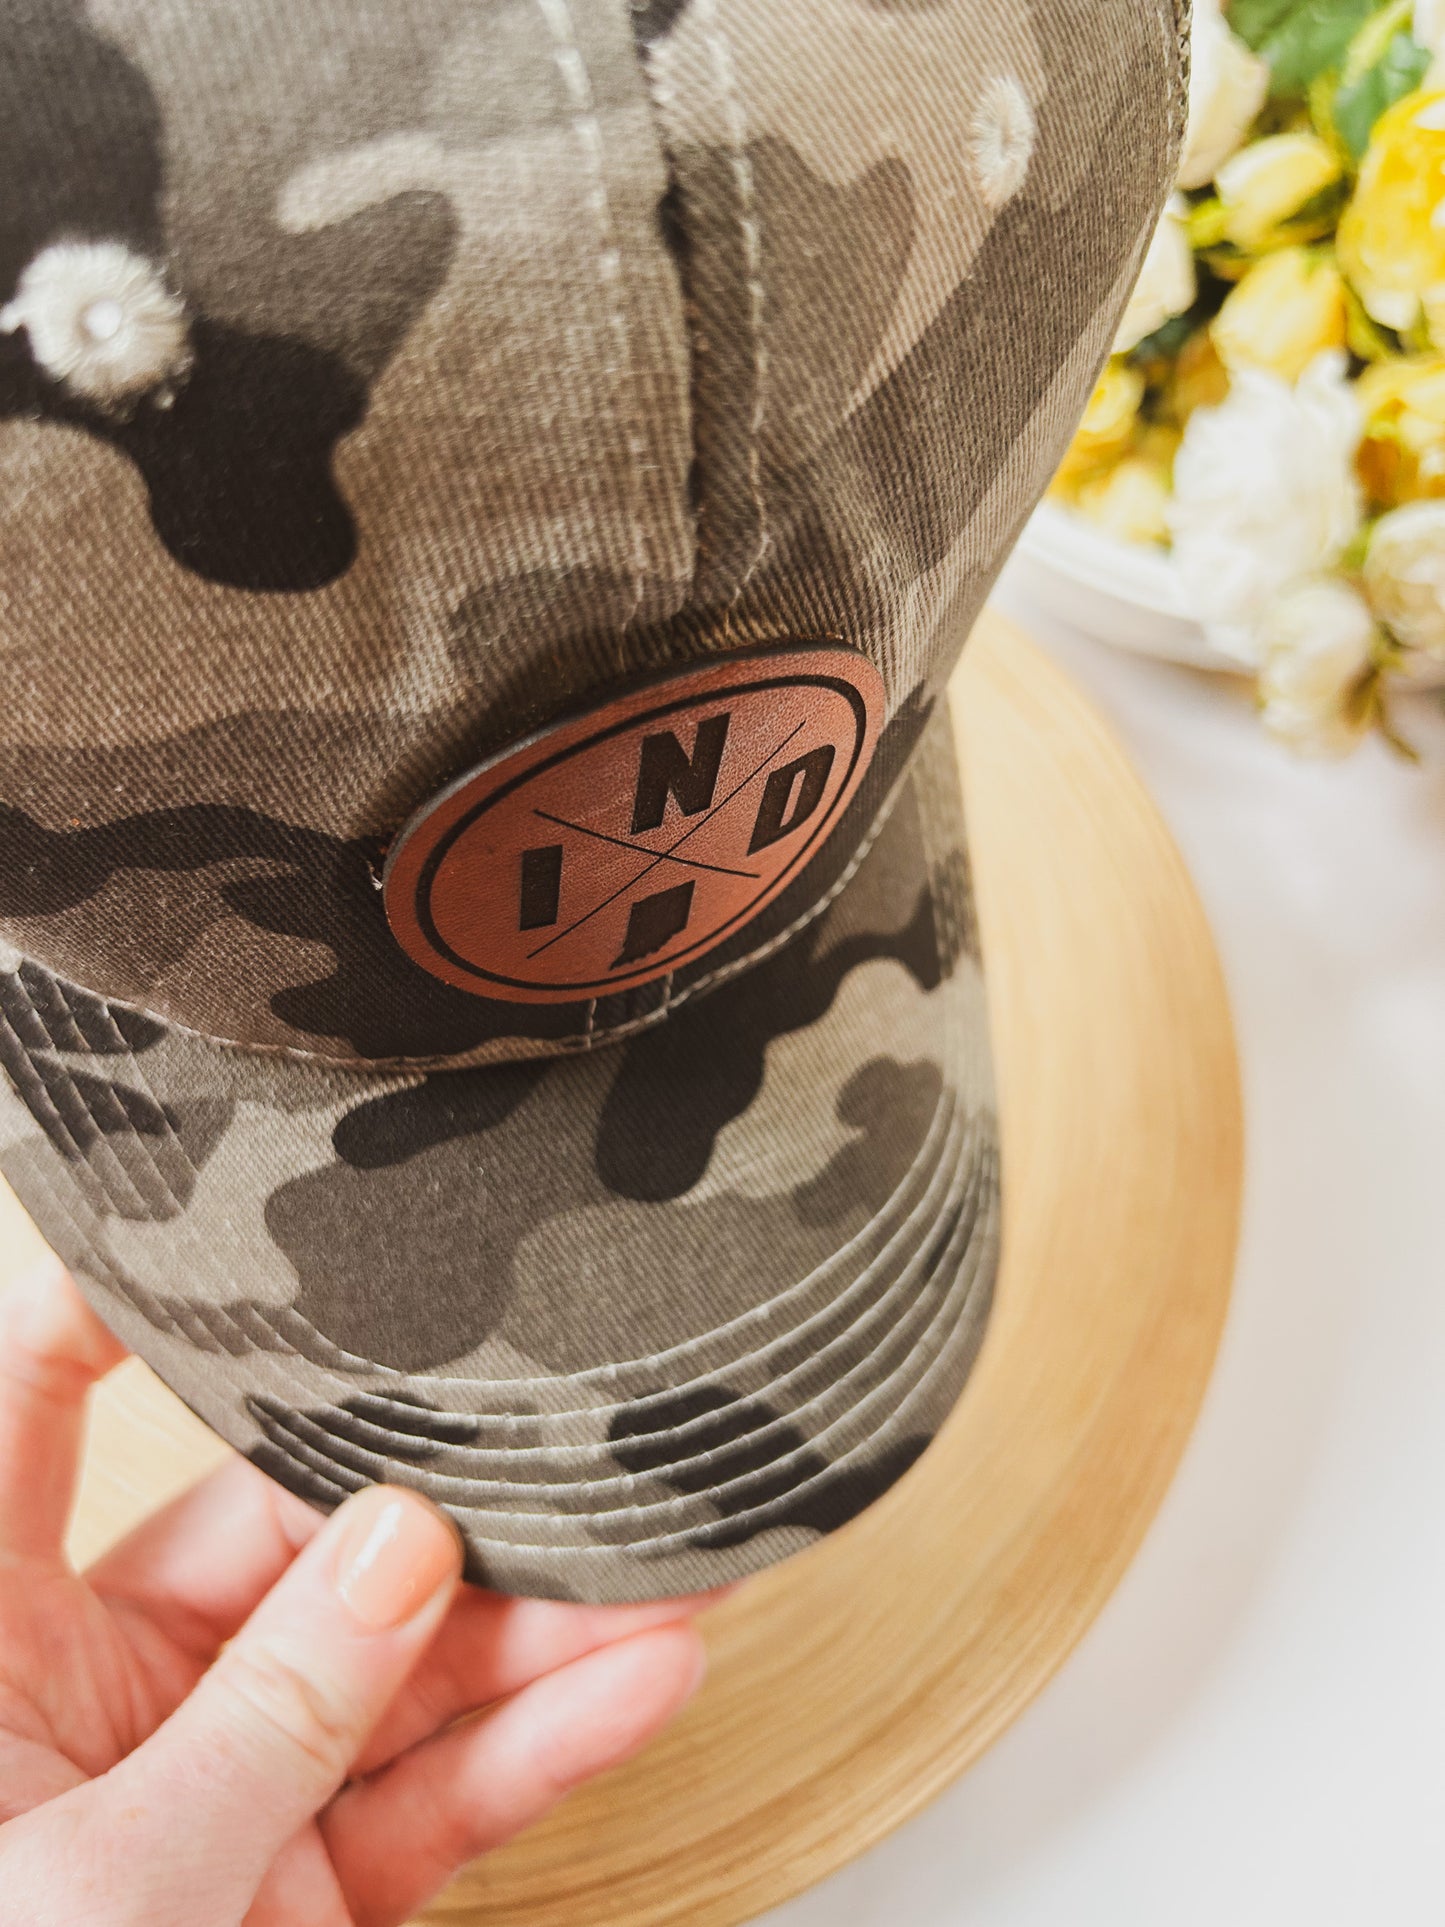 Circle IND Leather Patch on Camo Baseball Hat - Snap Closure